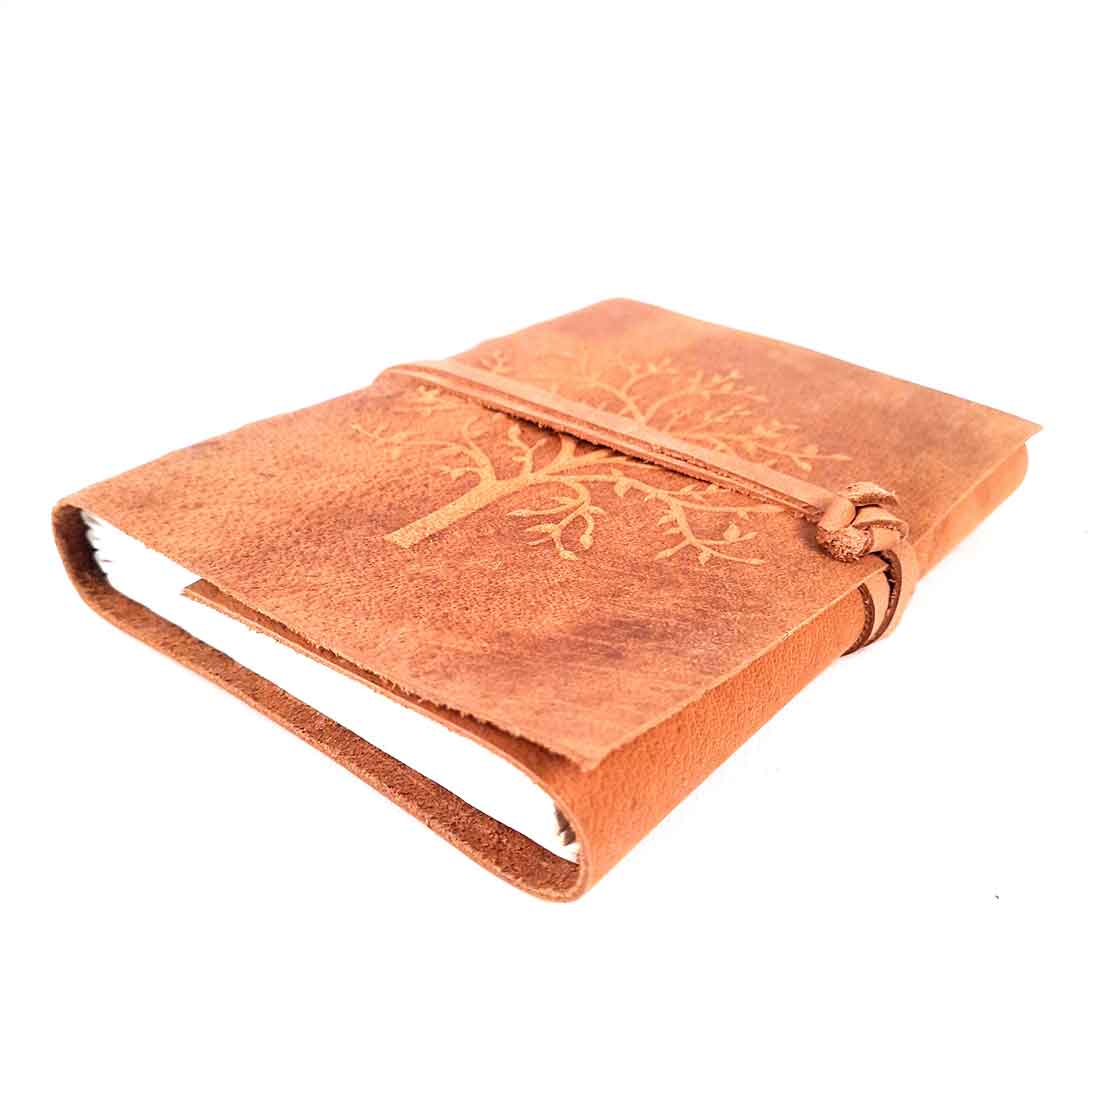 Antique Travel Diary | Leather Notebook for Work  - 7 Inch - ApkaMart